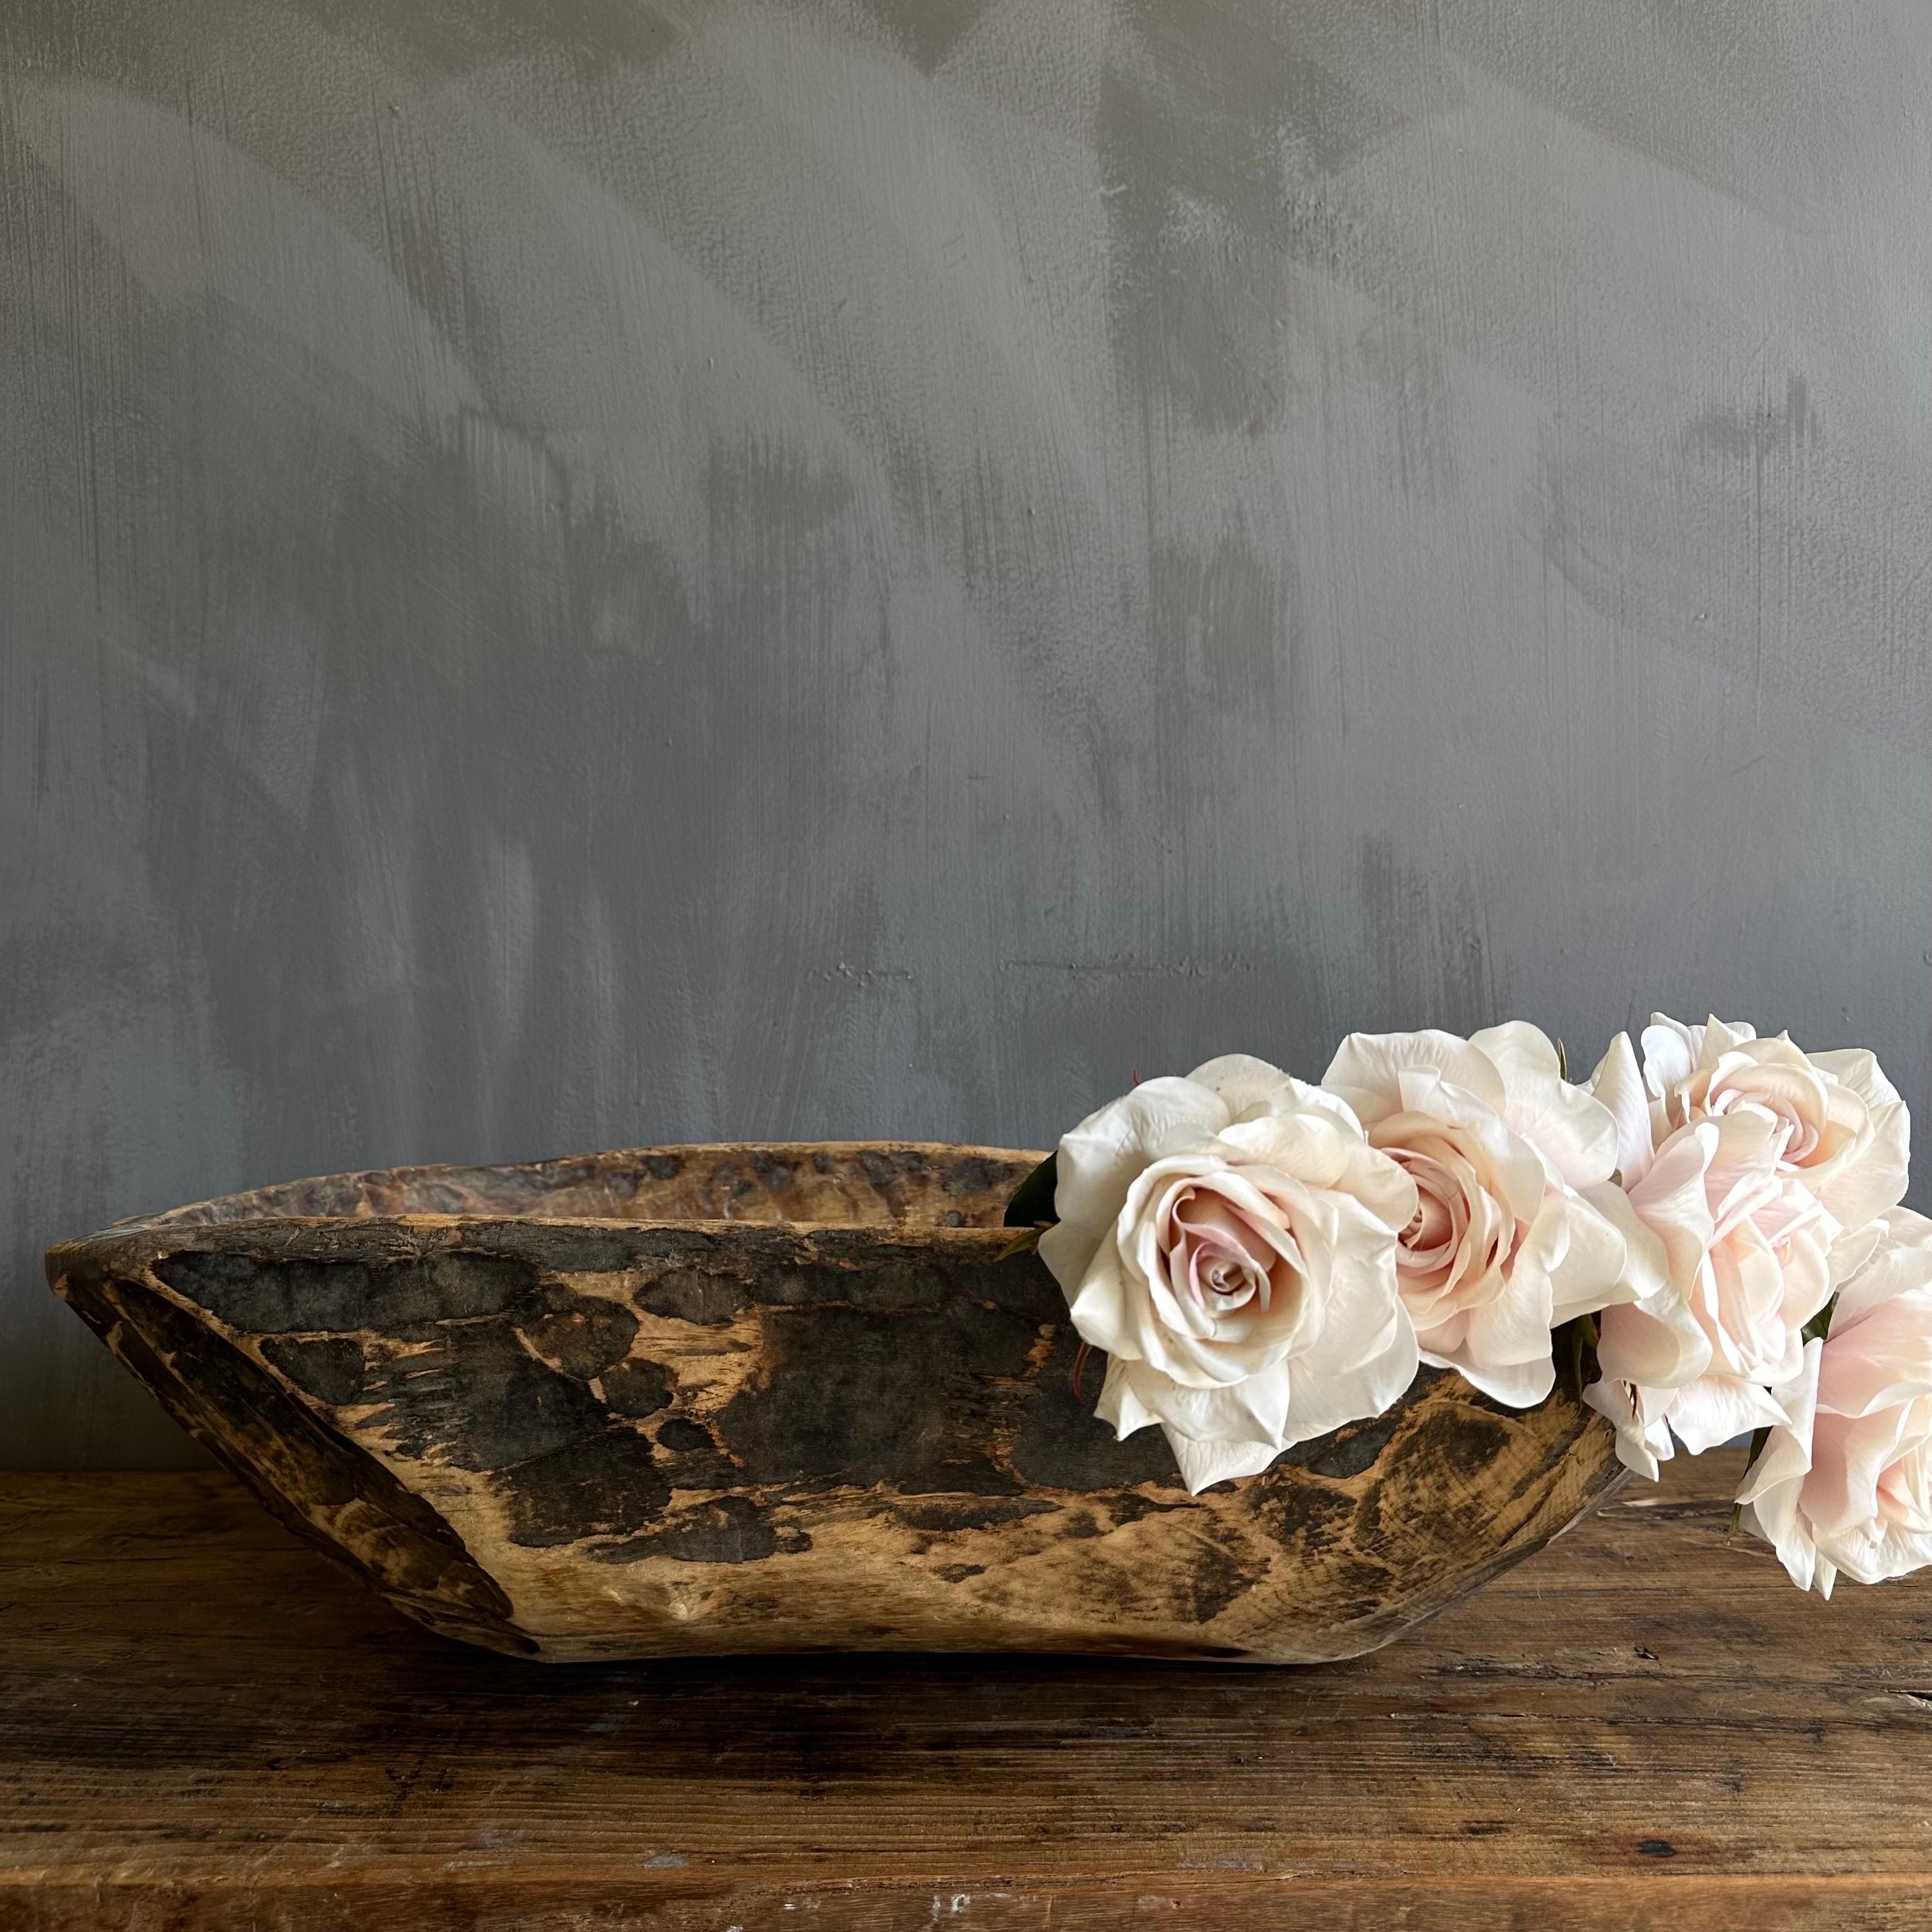 Vintage wood trough decorative bowl
Beautiful wood trough with natural patina. Can be used on a dining table or server for decoration.
Wood is natural with patina. Some troughs will have decorative metal on or around the bowl, please view the